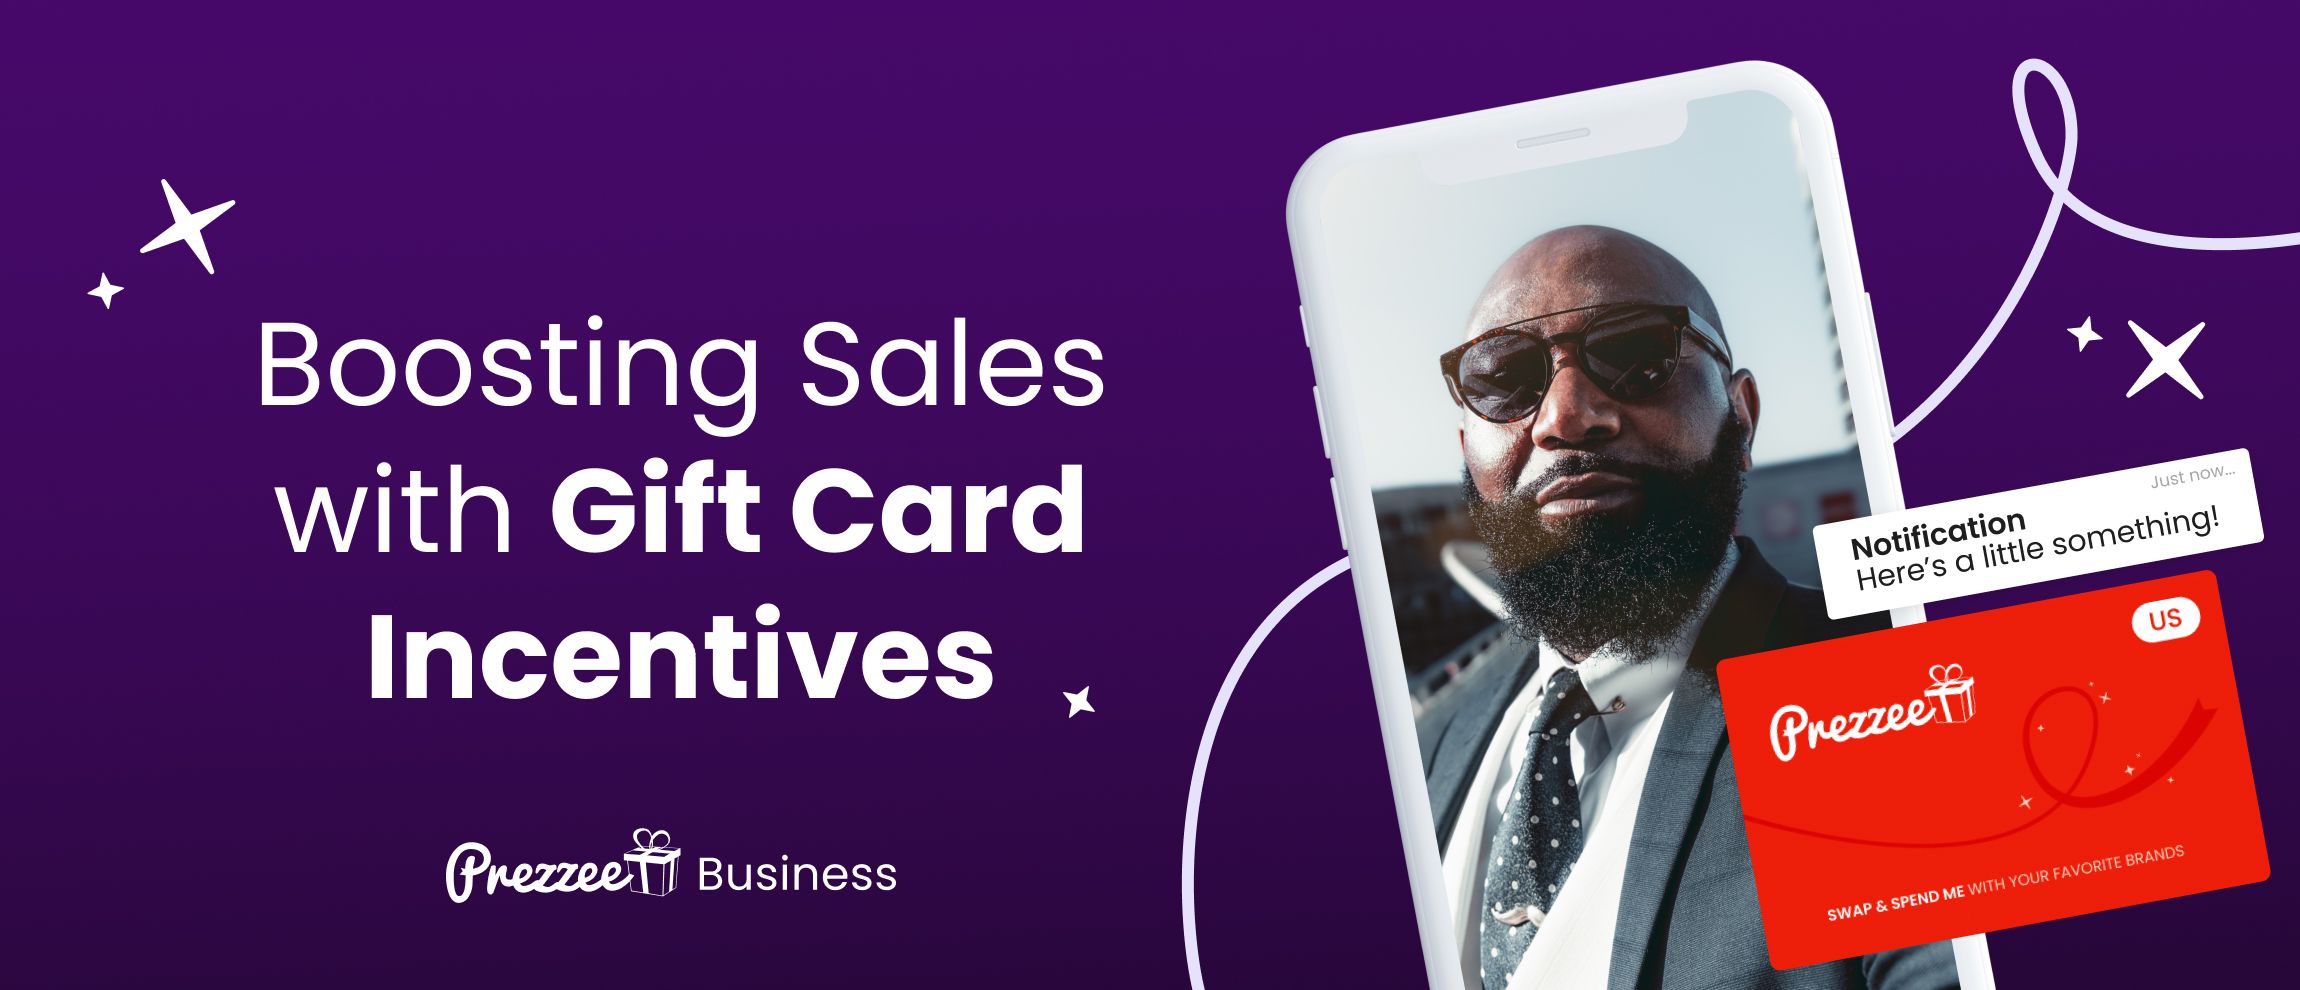 Corporate Gift Cards and Incentives -  Incentives